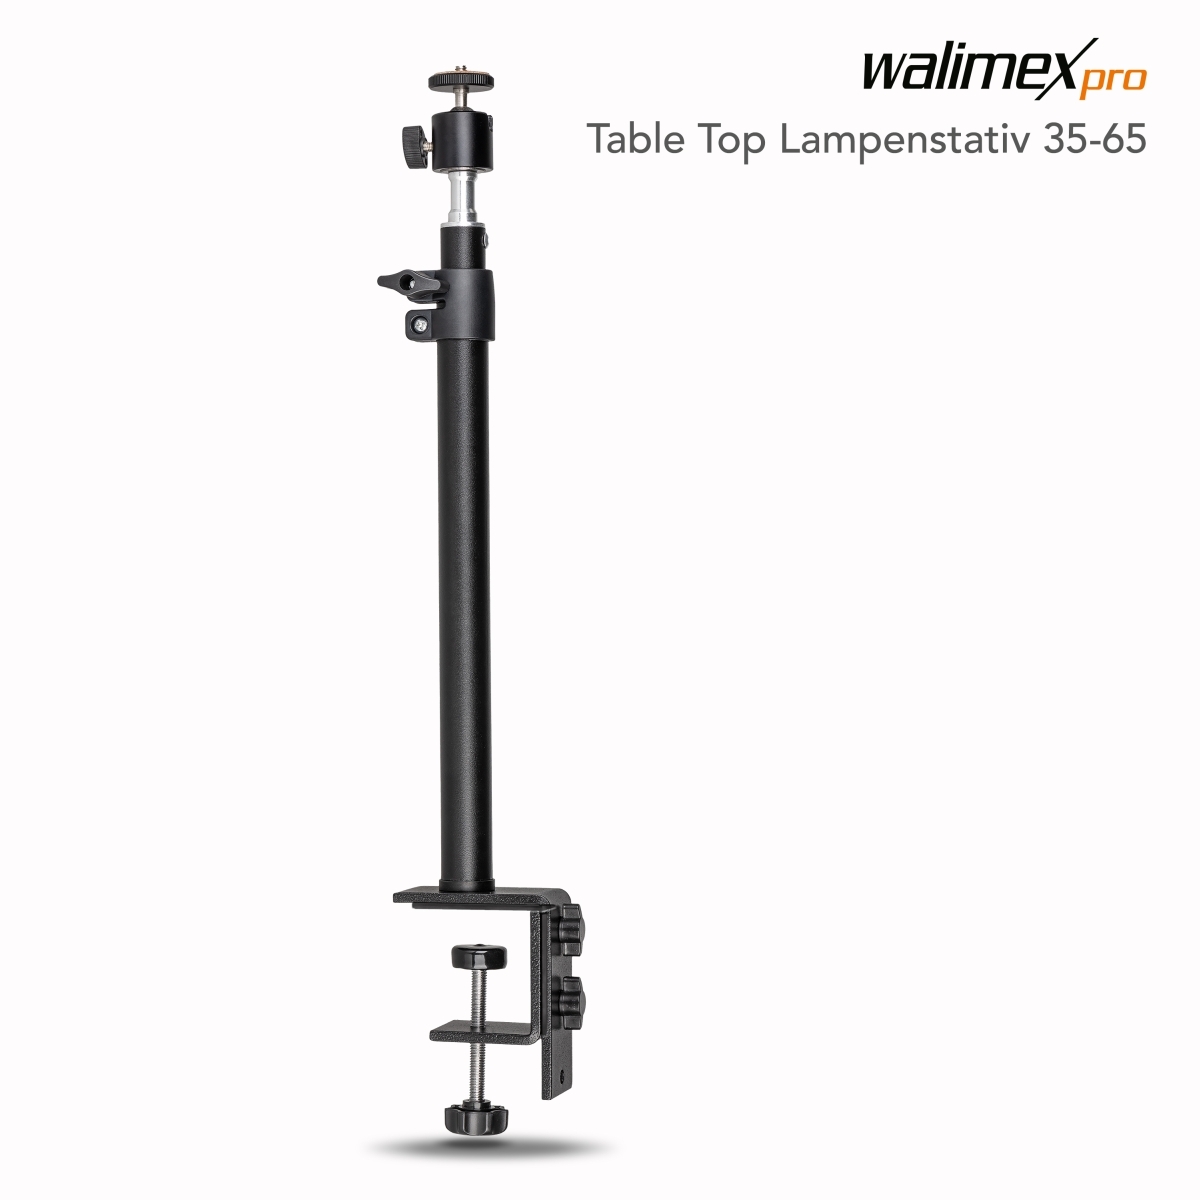 Walimex pro Table Top Clamp Stand 35-55